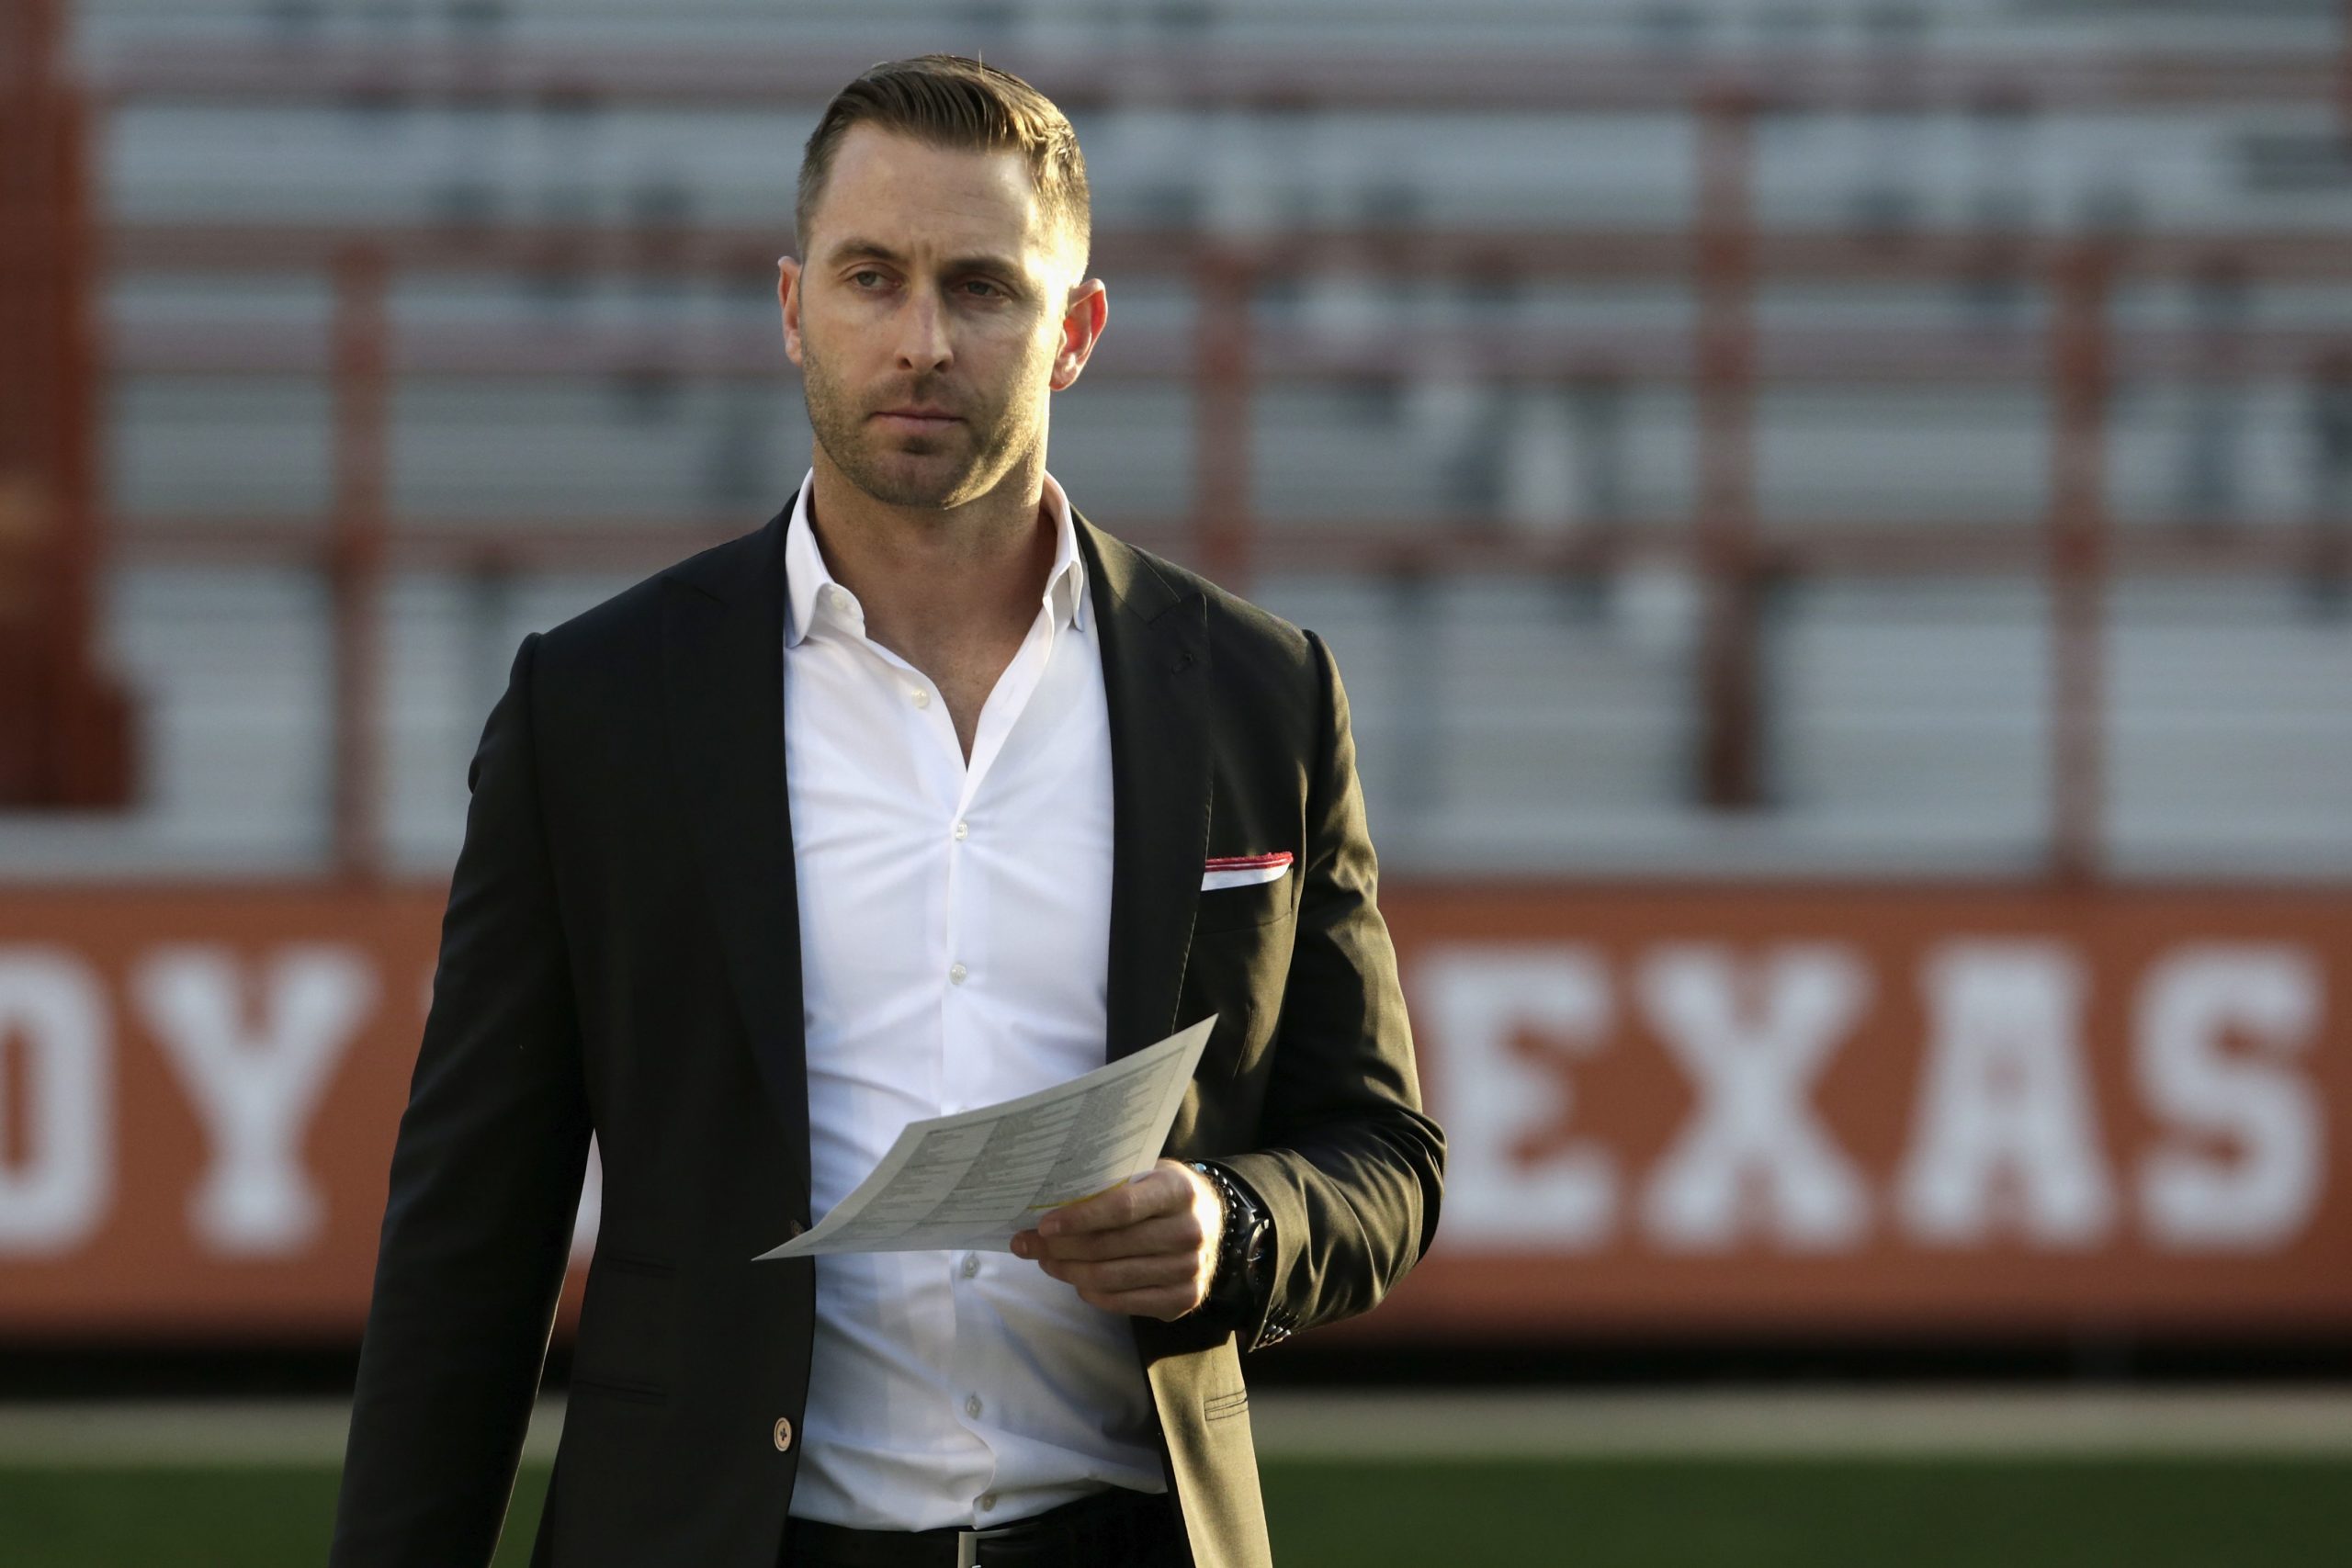 Kliff Kingsbury Cell Phone Policy Players social media